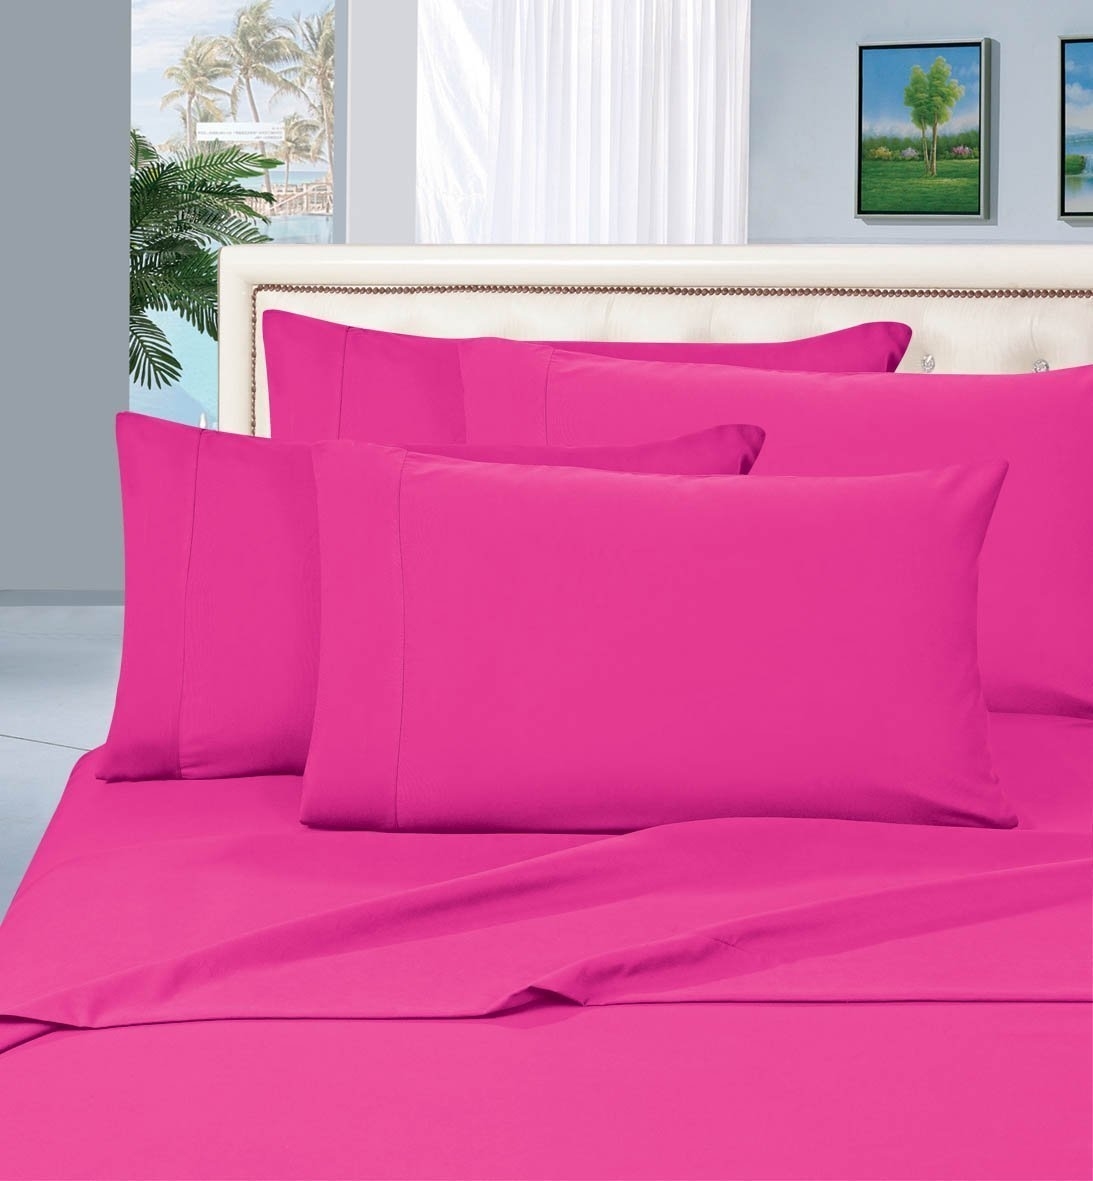 Elegant Comfort 1500 Series Wrinkle Resistant Egyptian Quality Hypoallergenic Ultra Soft Luxury 4-piece Bed Sheet Set, King, Hot Pink